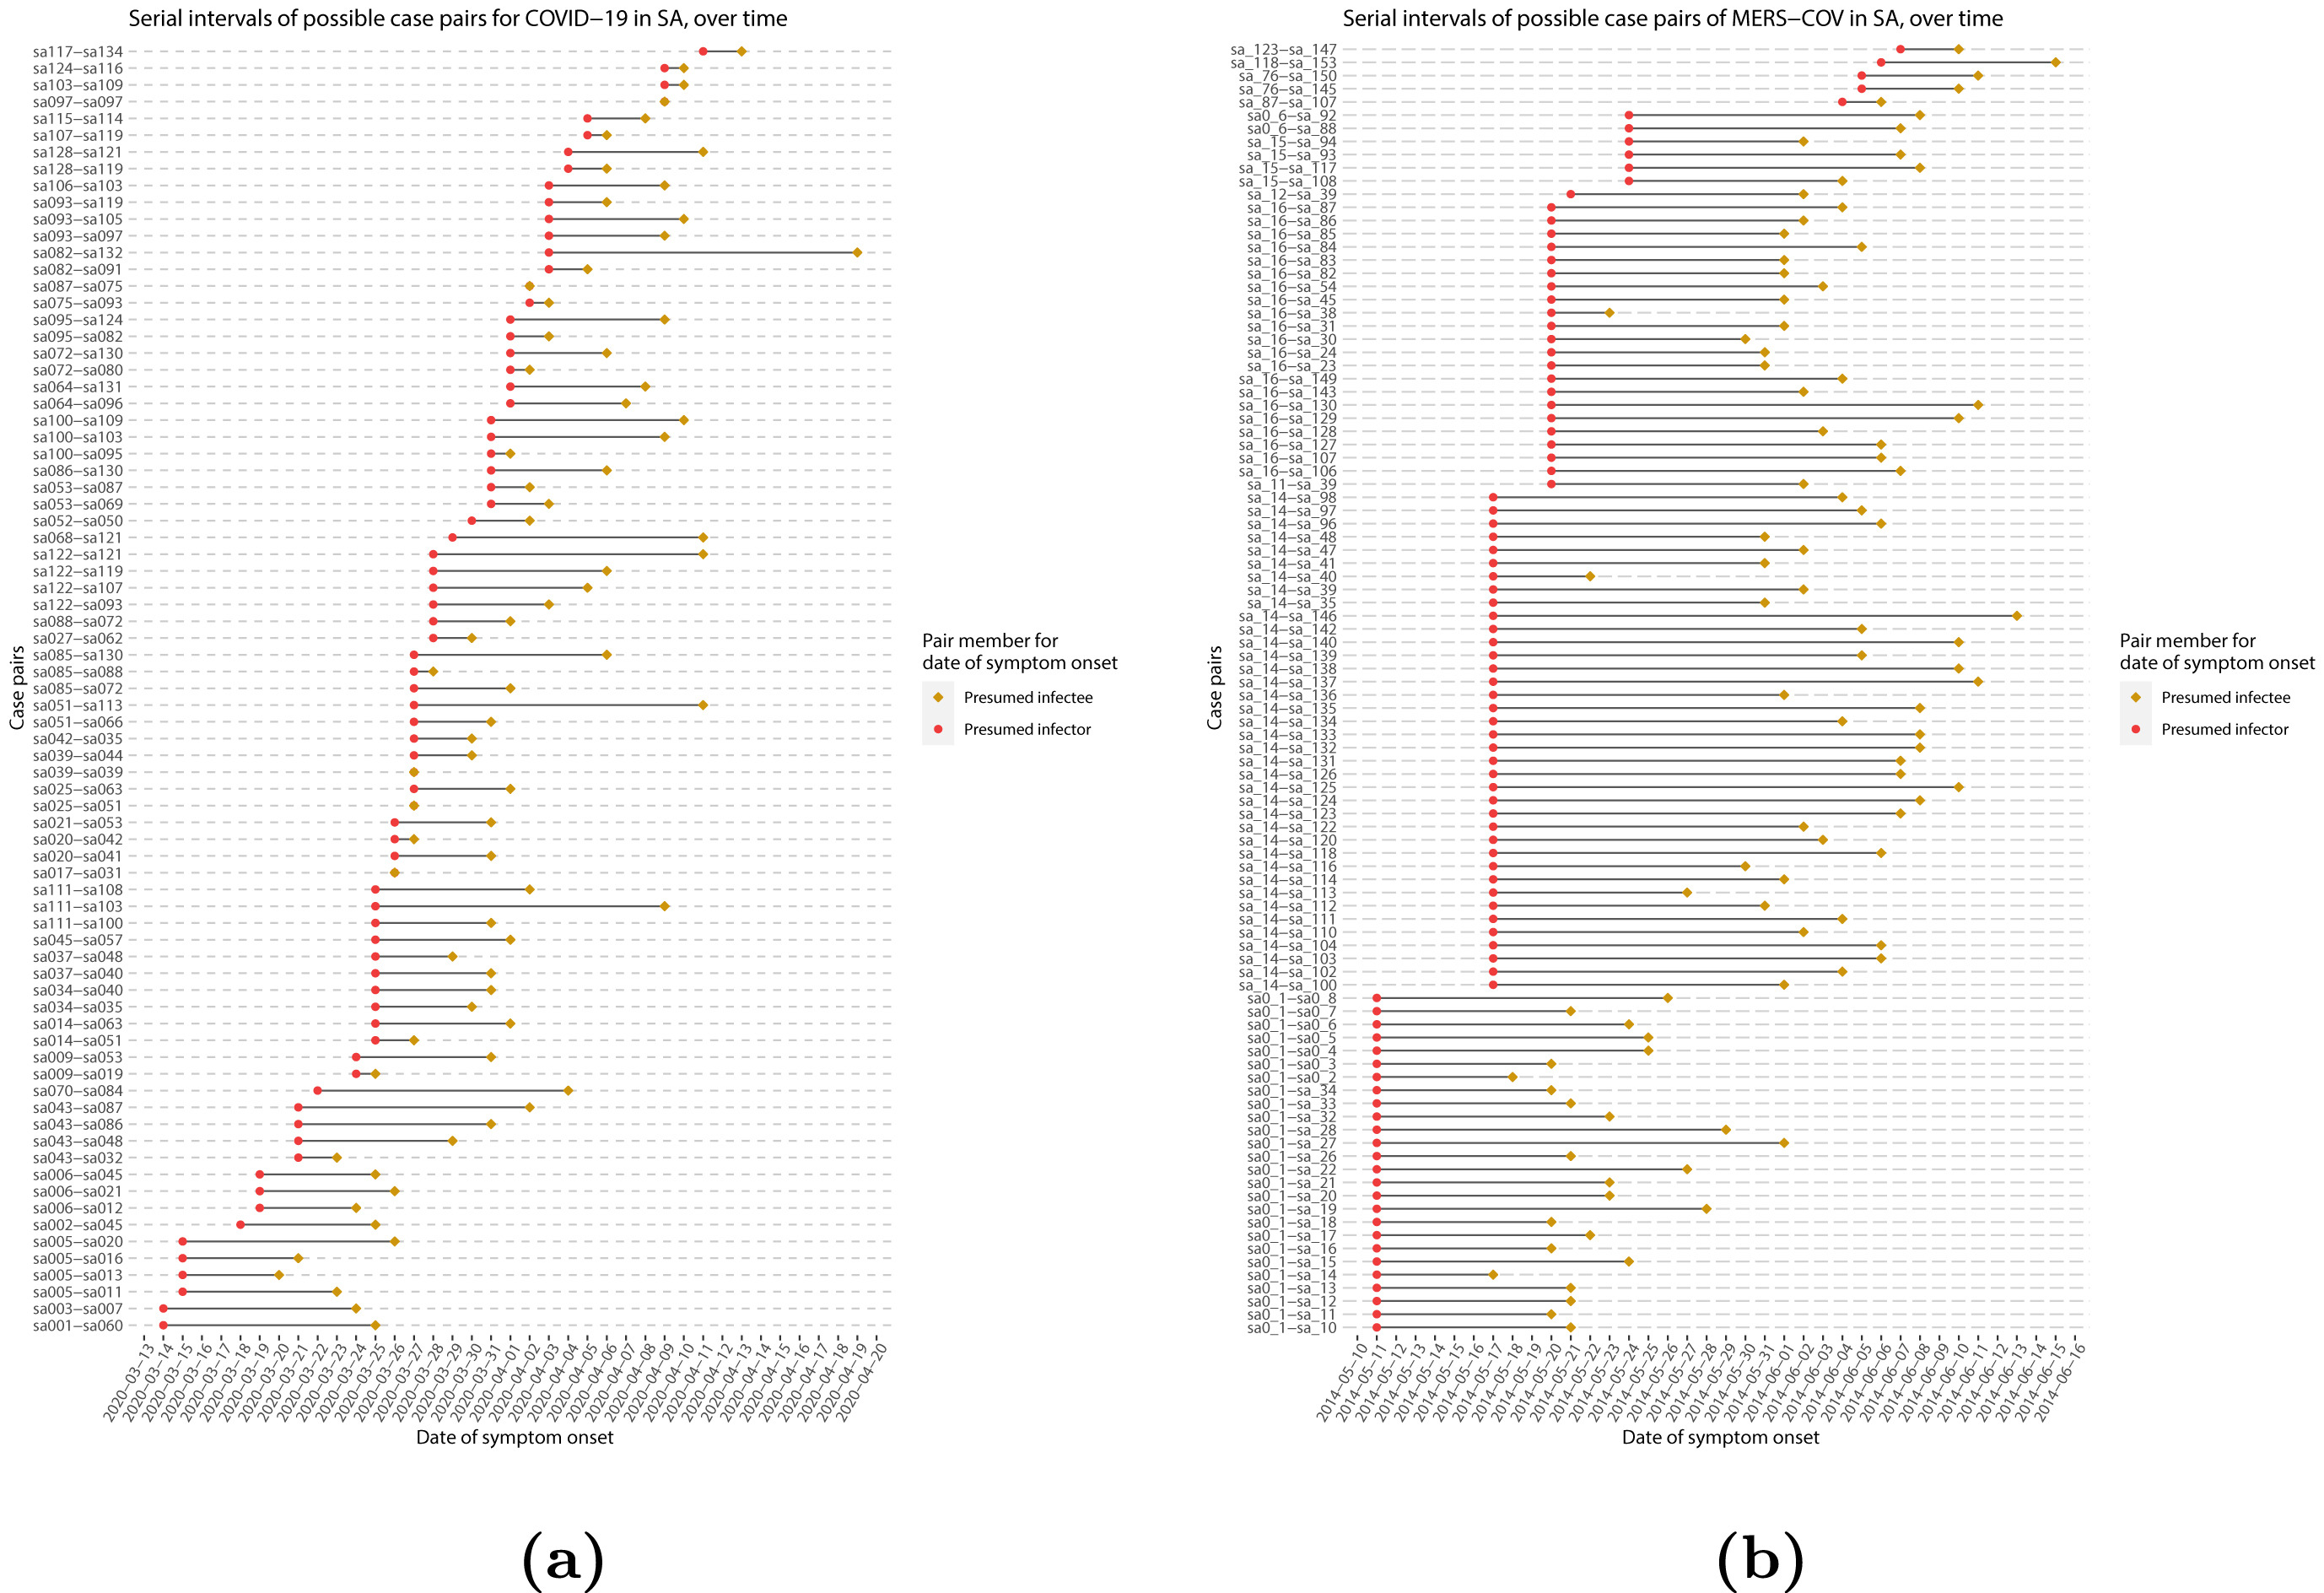 Serial intervals of possible case pairs in (a) COVID-19 and (b) MERS-CoV. Pairs represent a presumed infector and their presumed infectee plotted by date of symptom onset (Althobaity et al., 2022).